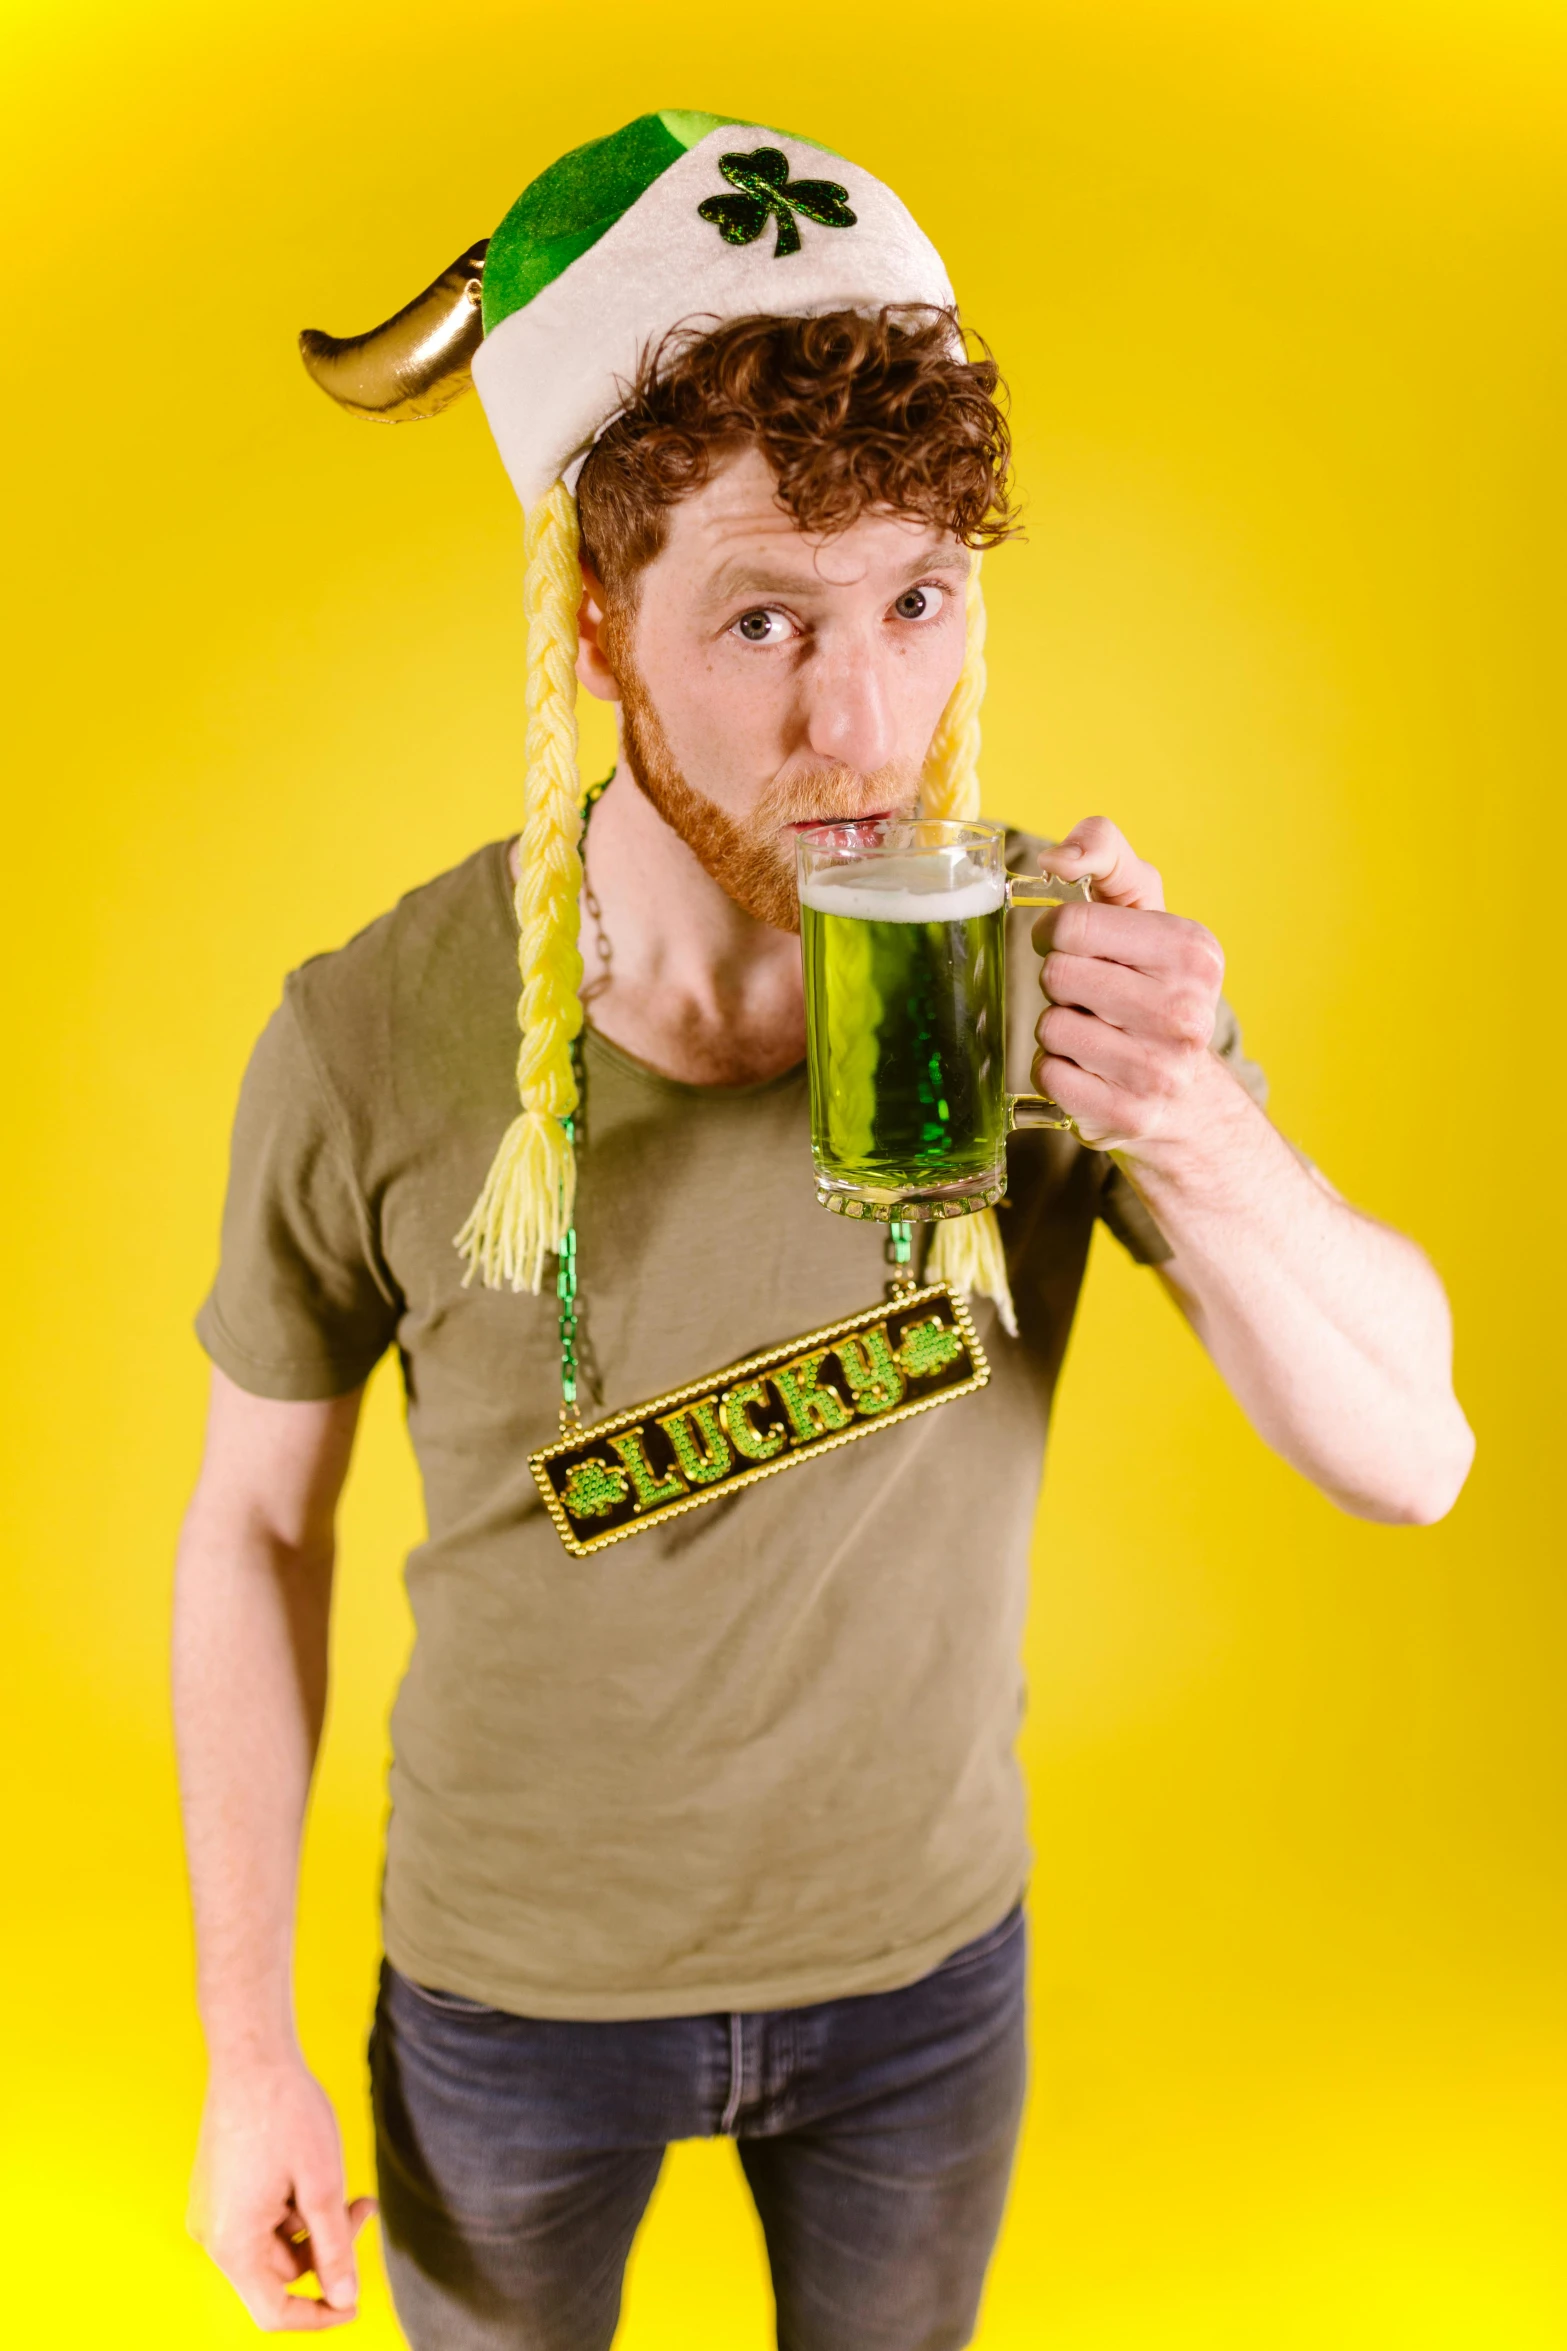 a man in a hat holding a glass of beer, inspired by Dicky Doyle, renaissance, green shirt, pudica pose, jackstraws, hr ginger